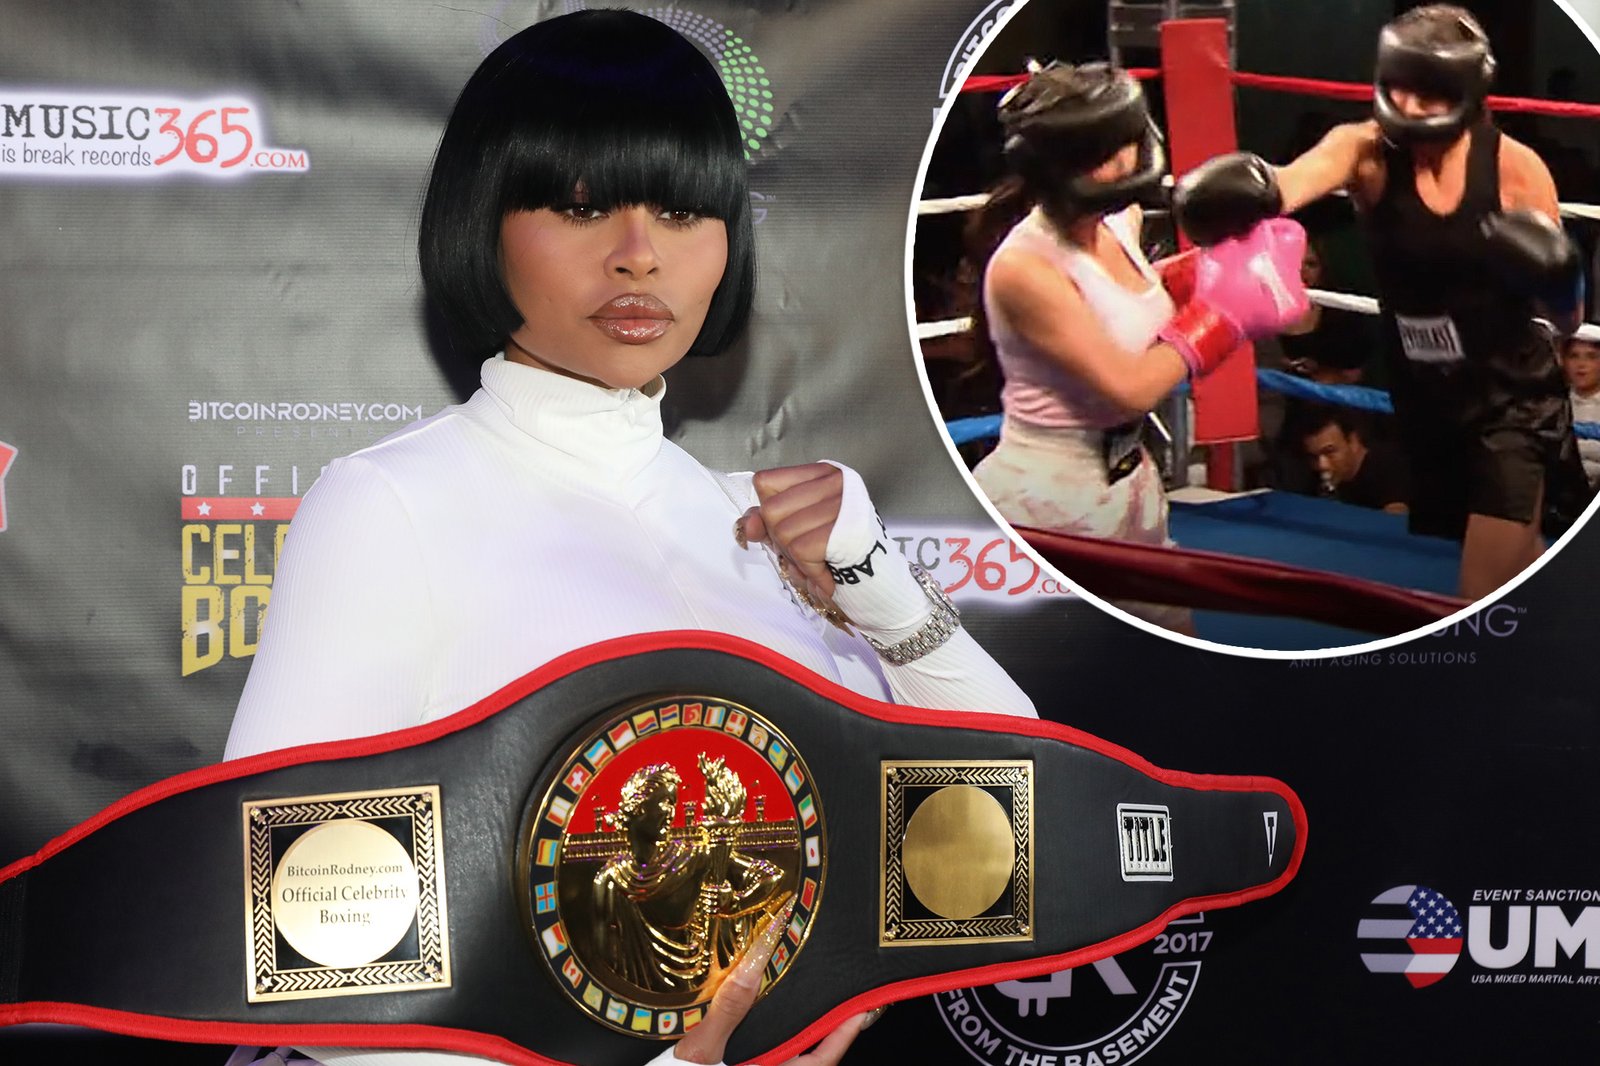 Blac Chyna ‘smiled’ when she teamed up with boxer who ‘beat Kim Kardashian’